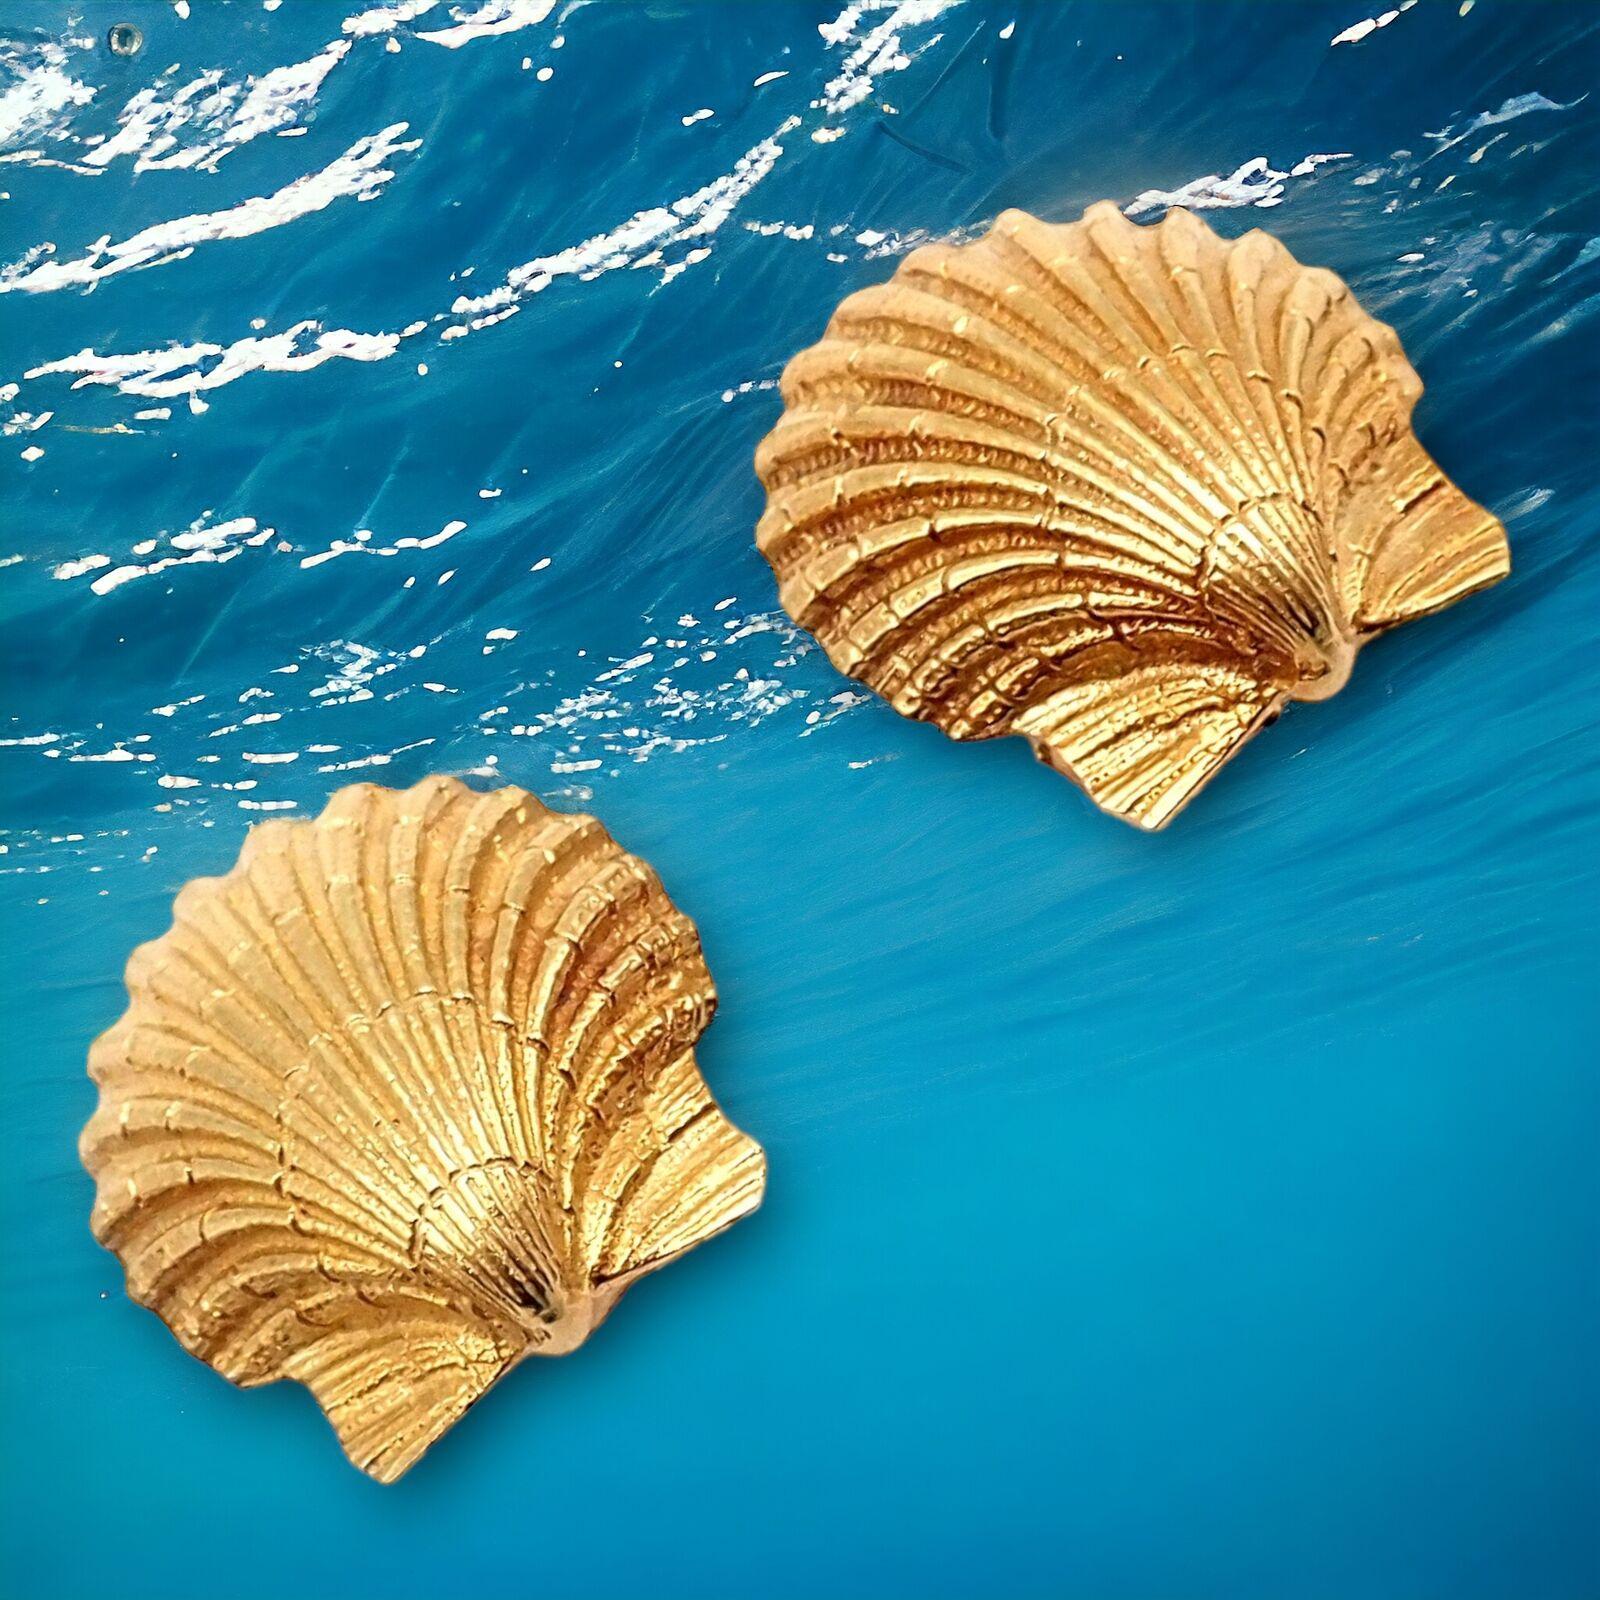 18k Yellow Gold Vintage Seashell Earrings by Jean Schlumberger for Tiffany & Co. 
These authentic vintage Tiffany & Co. Schlumberger earrings are a testament to exquisite craftsmanship and timeless design. 
Crafted from 18k yellow gold, they feature